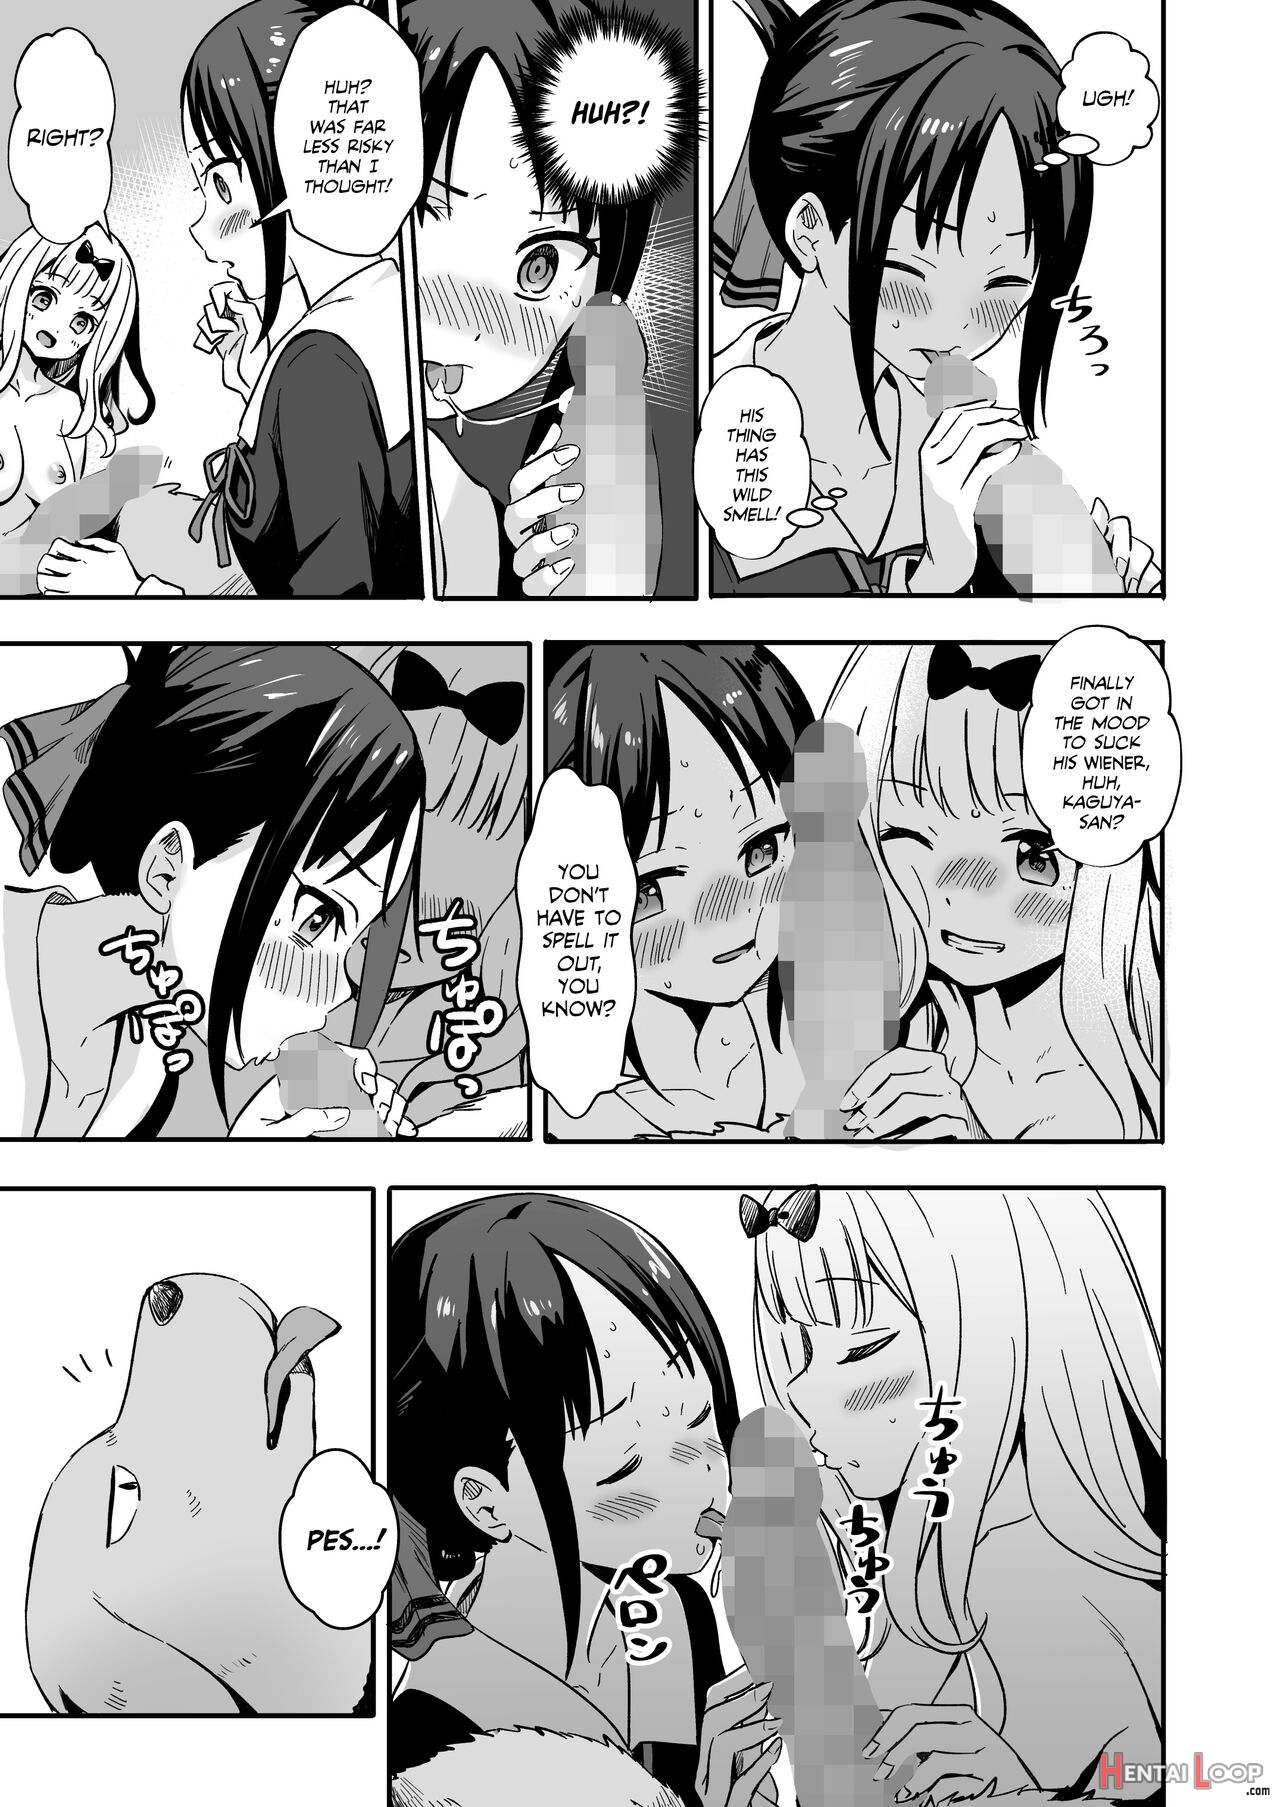 Kaguya-san Takes Care Of Pes's Sexual Urges! page 15